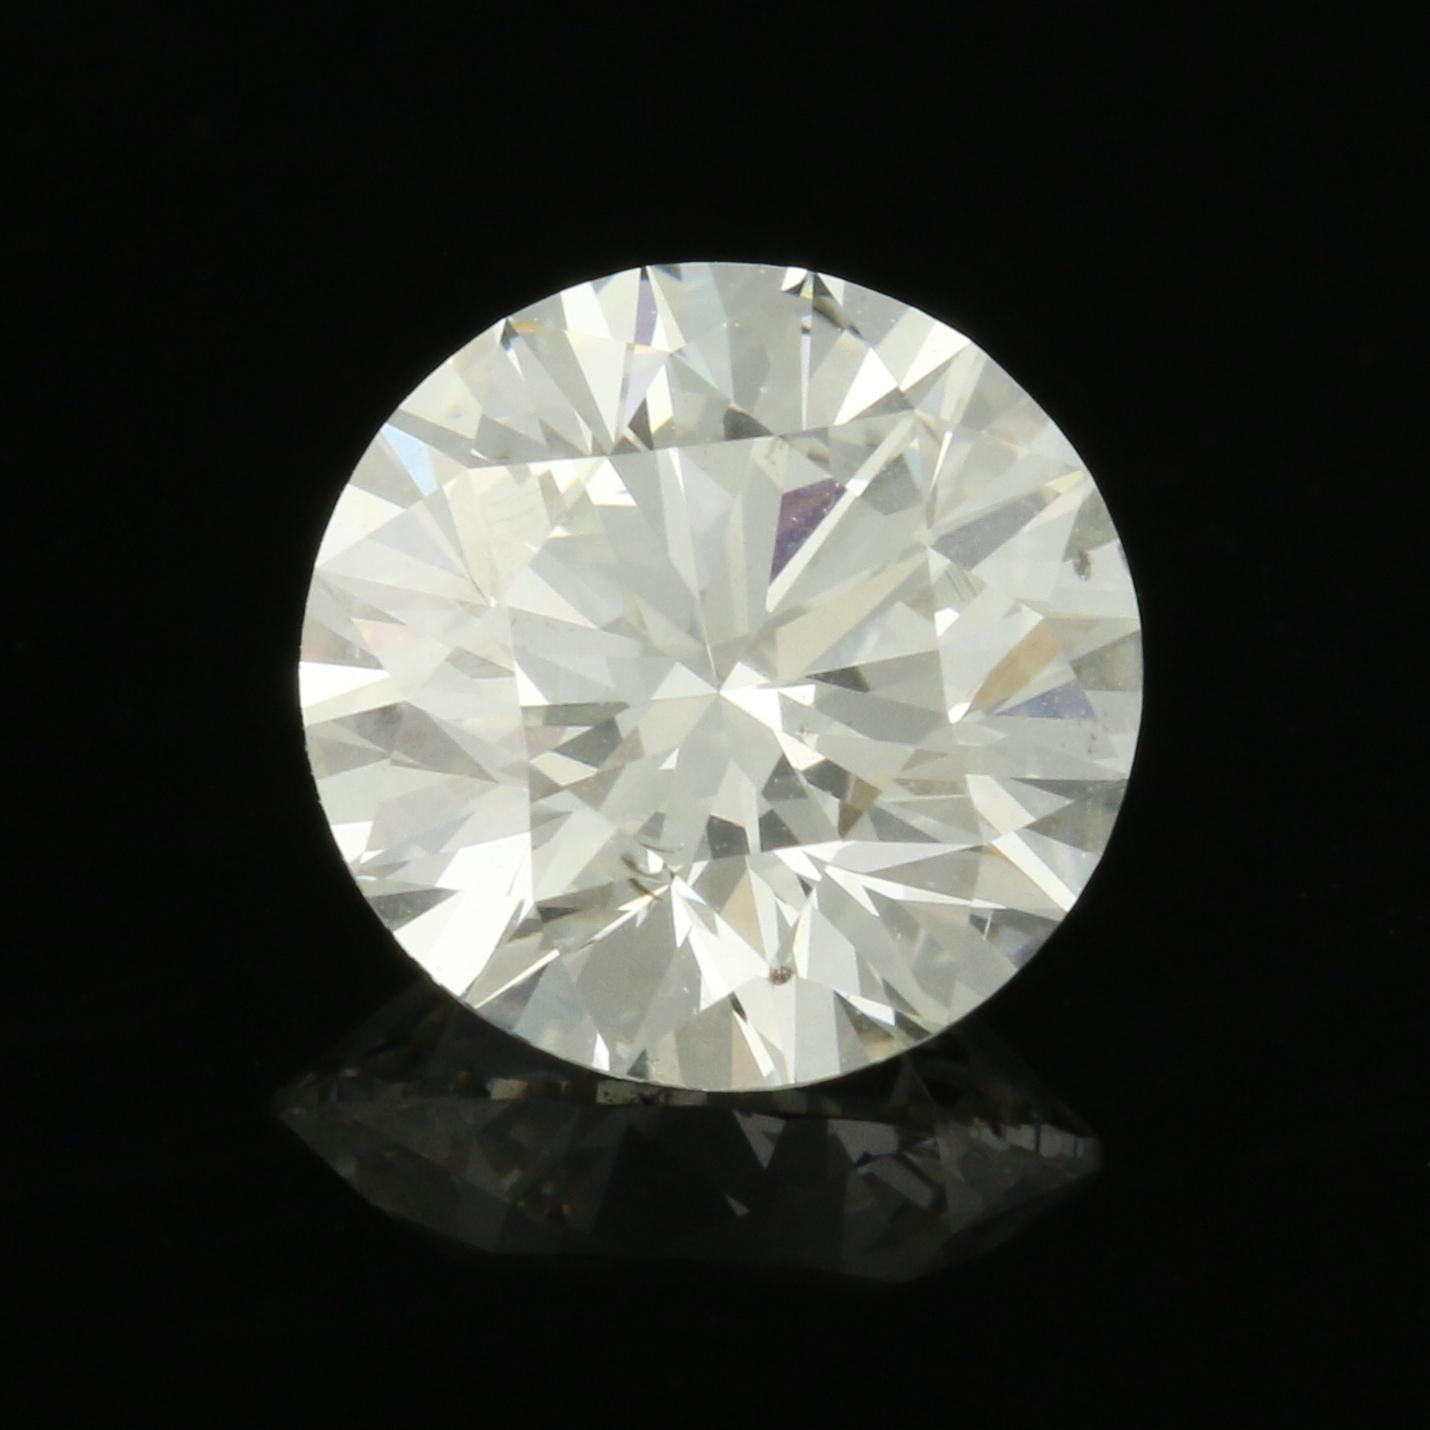 Shape/Cut: Round Brilliant 
Clarity: SI2 
Color: I 
Dimensions (mm): 7.48 - 7.53 x 4.68 
Weight: 1.60ct 

Cut: Excellent 
Polish: Excellent 
Symmetry: Very Good 

GIA Report Number: 6197773198 

Please check out the enlarged pictures.

Thank you for